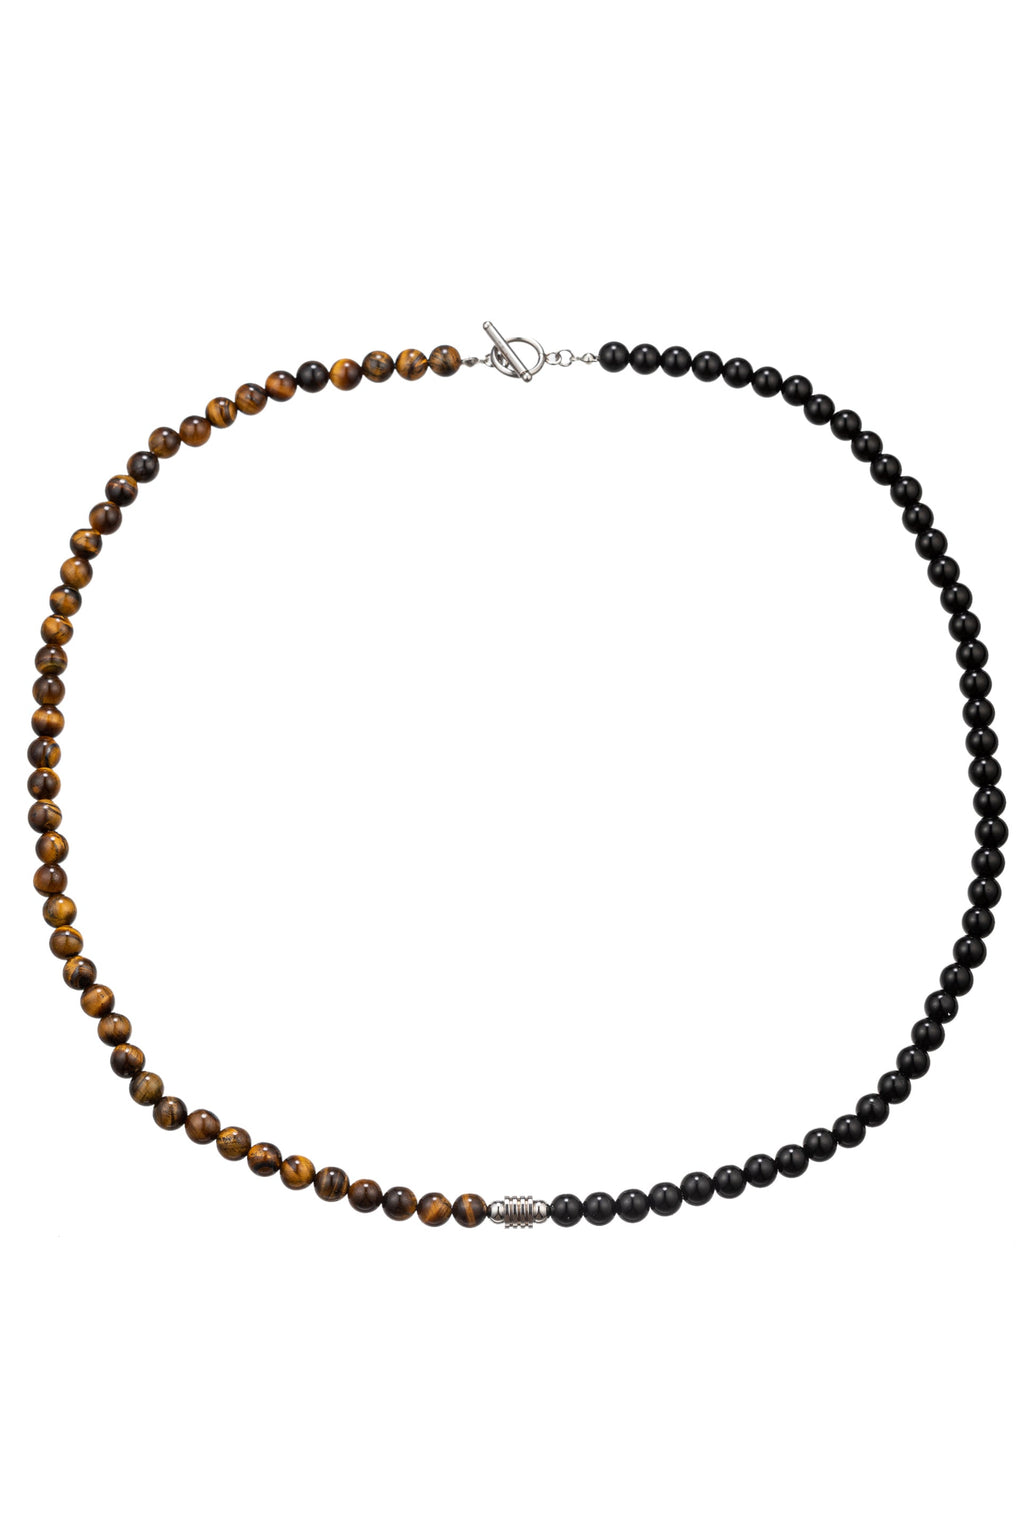 Add a Touch of Earthy Elegance with the Wyatt Tiger Eye & Onyx Necklace.